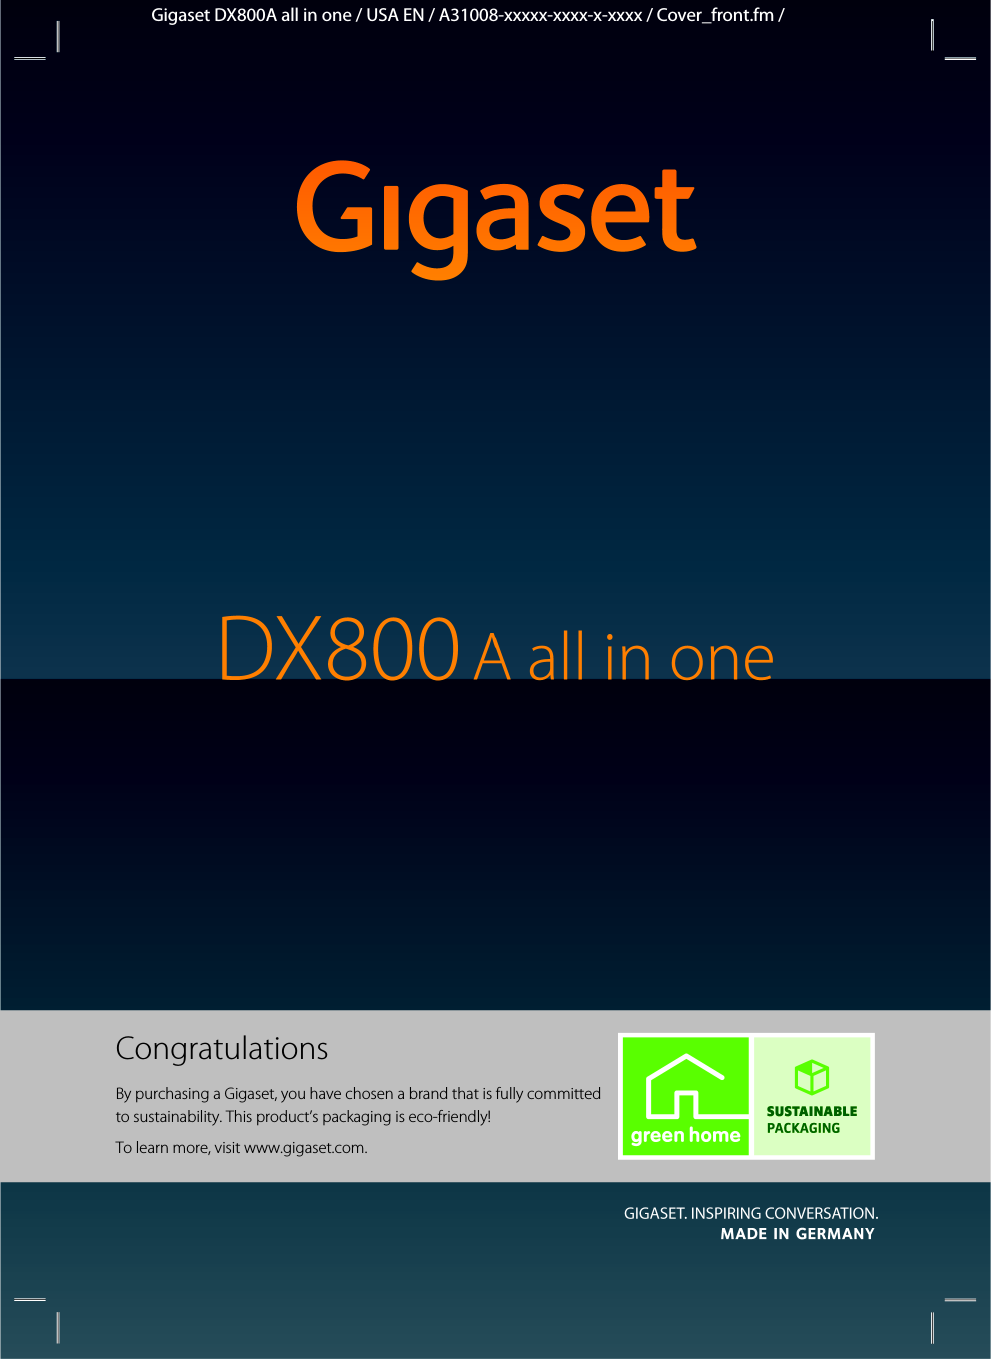 Gigaset DX800A all in one / USA EN / A31008-xxxxx-xxxx-x-xxxx / Cover_front.fm / CongratulationsBy purchasing a Gigaset, you have chosen a brand that is fully committed to sustainability. This product’s packaging is eco-friendly!To learn more, visit www.gigaset.com.